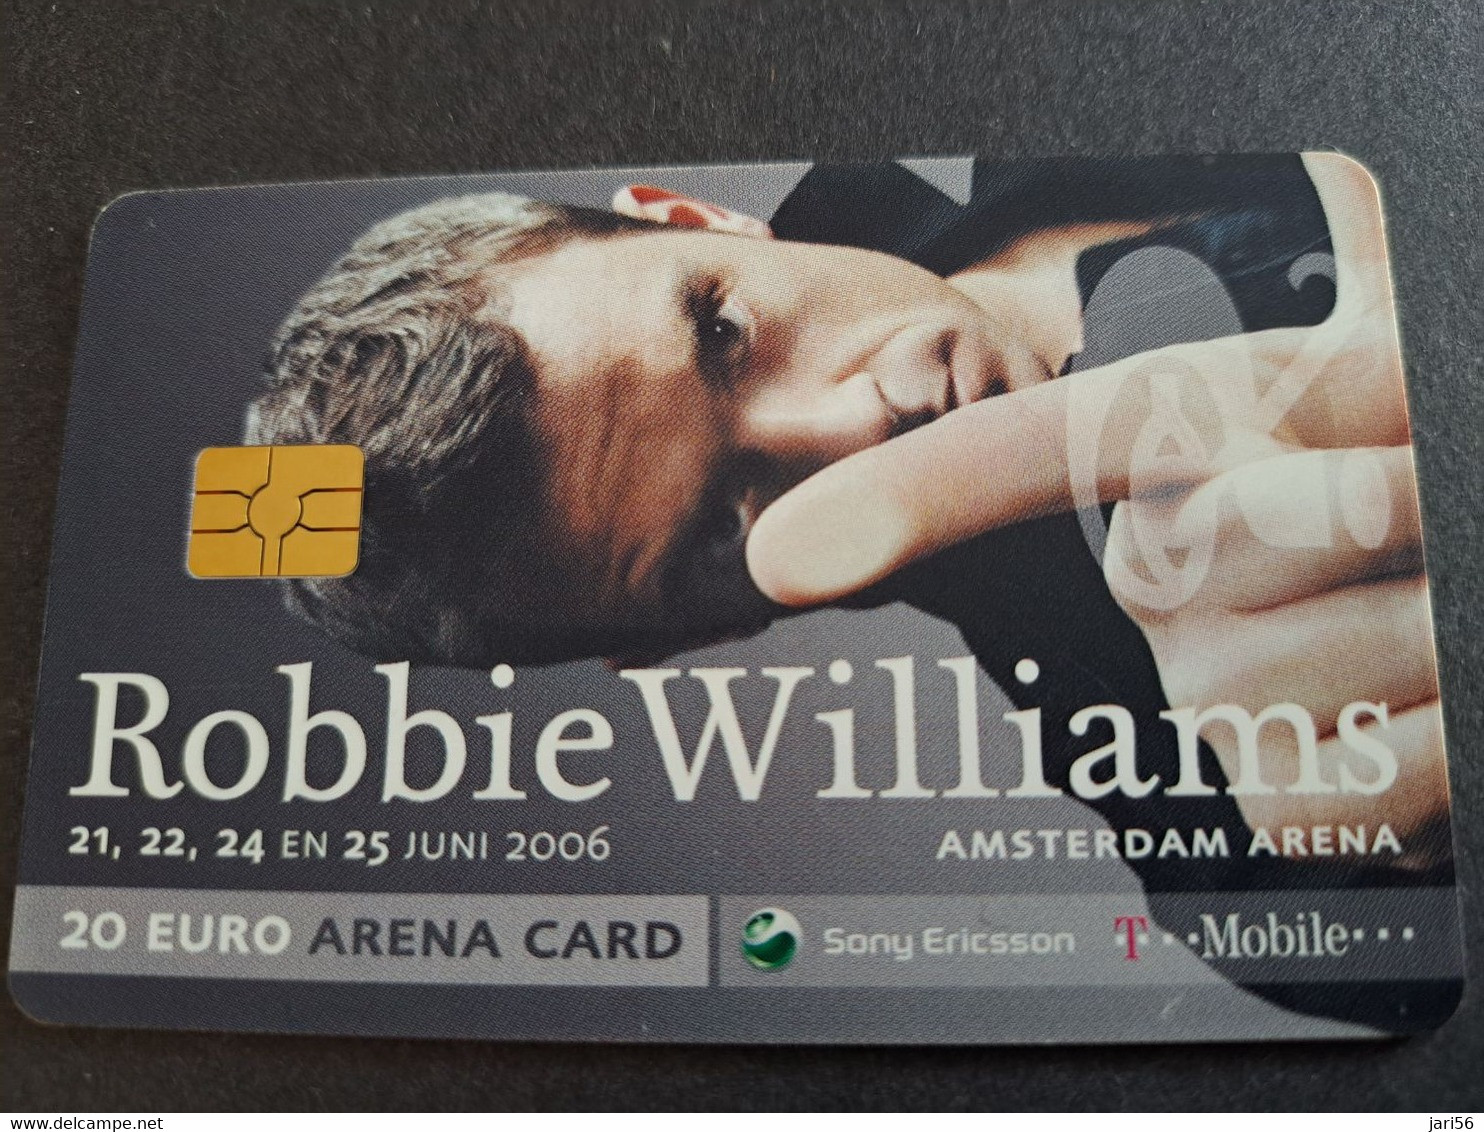 NETHERLANDS CHIPCARD € 20,-  ,- ARENA CARD / ROBBIE WILLIAMS   /MUSIC   - USED CARD  ** 10368** - Public